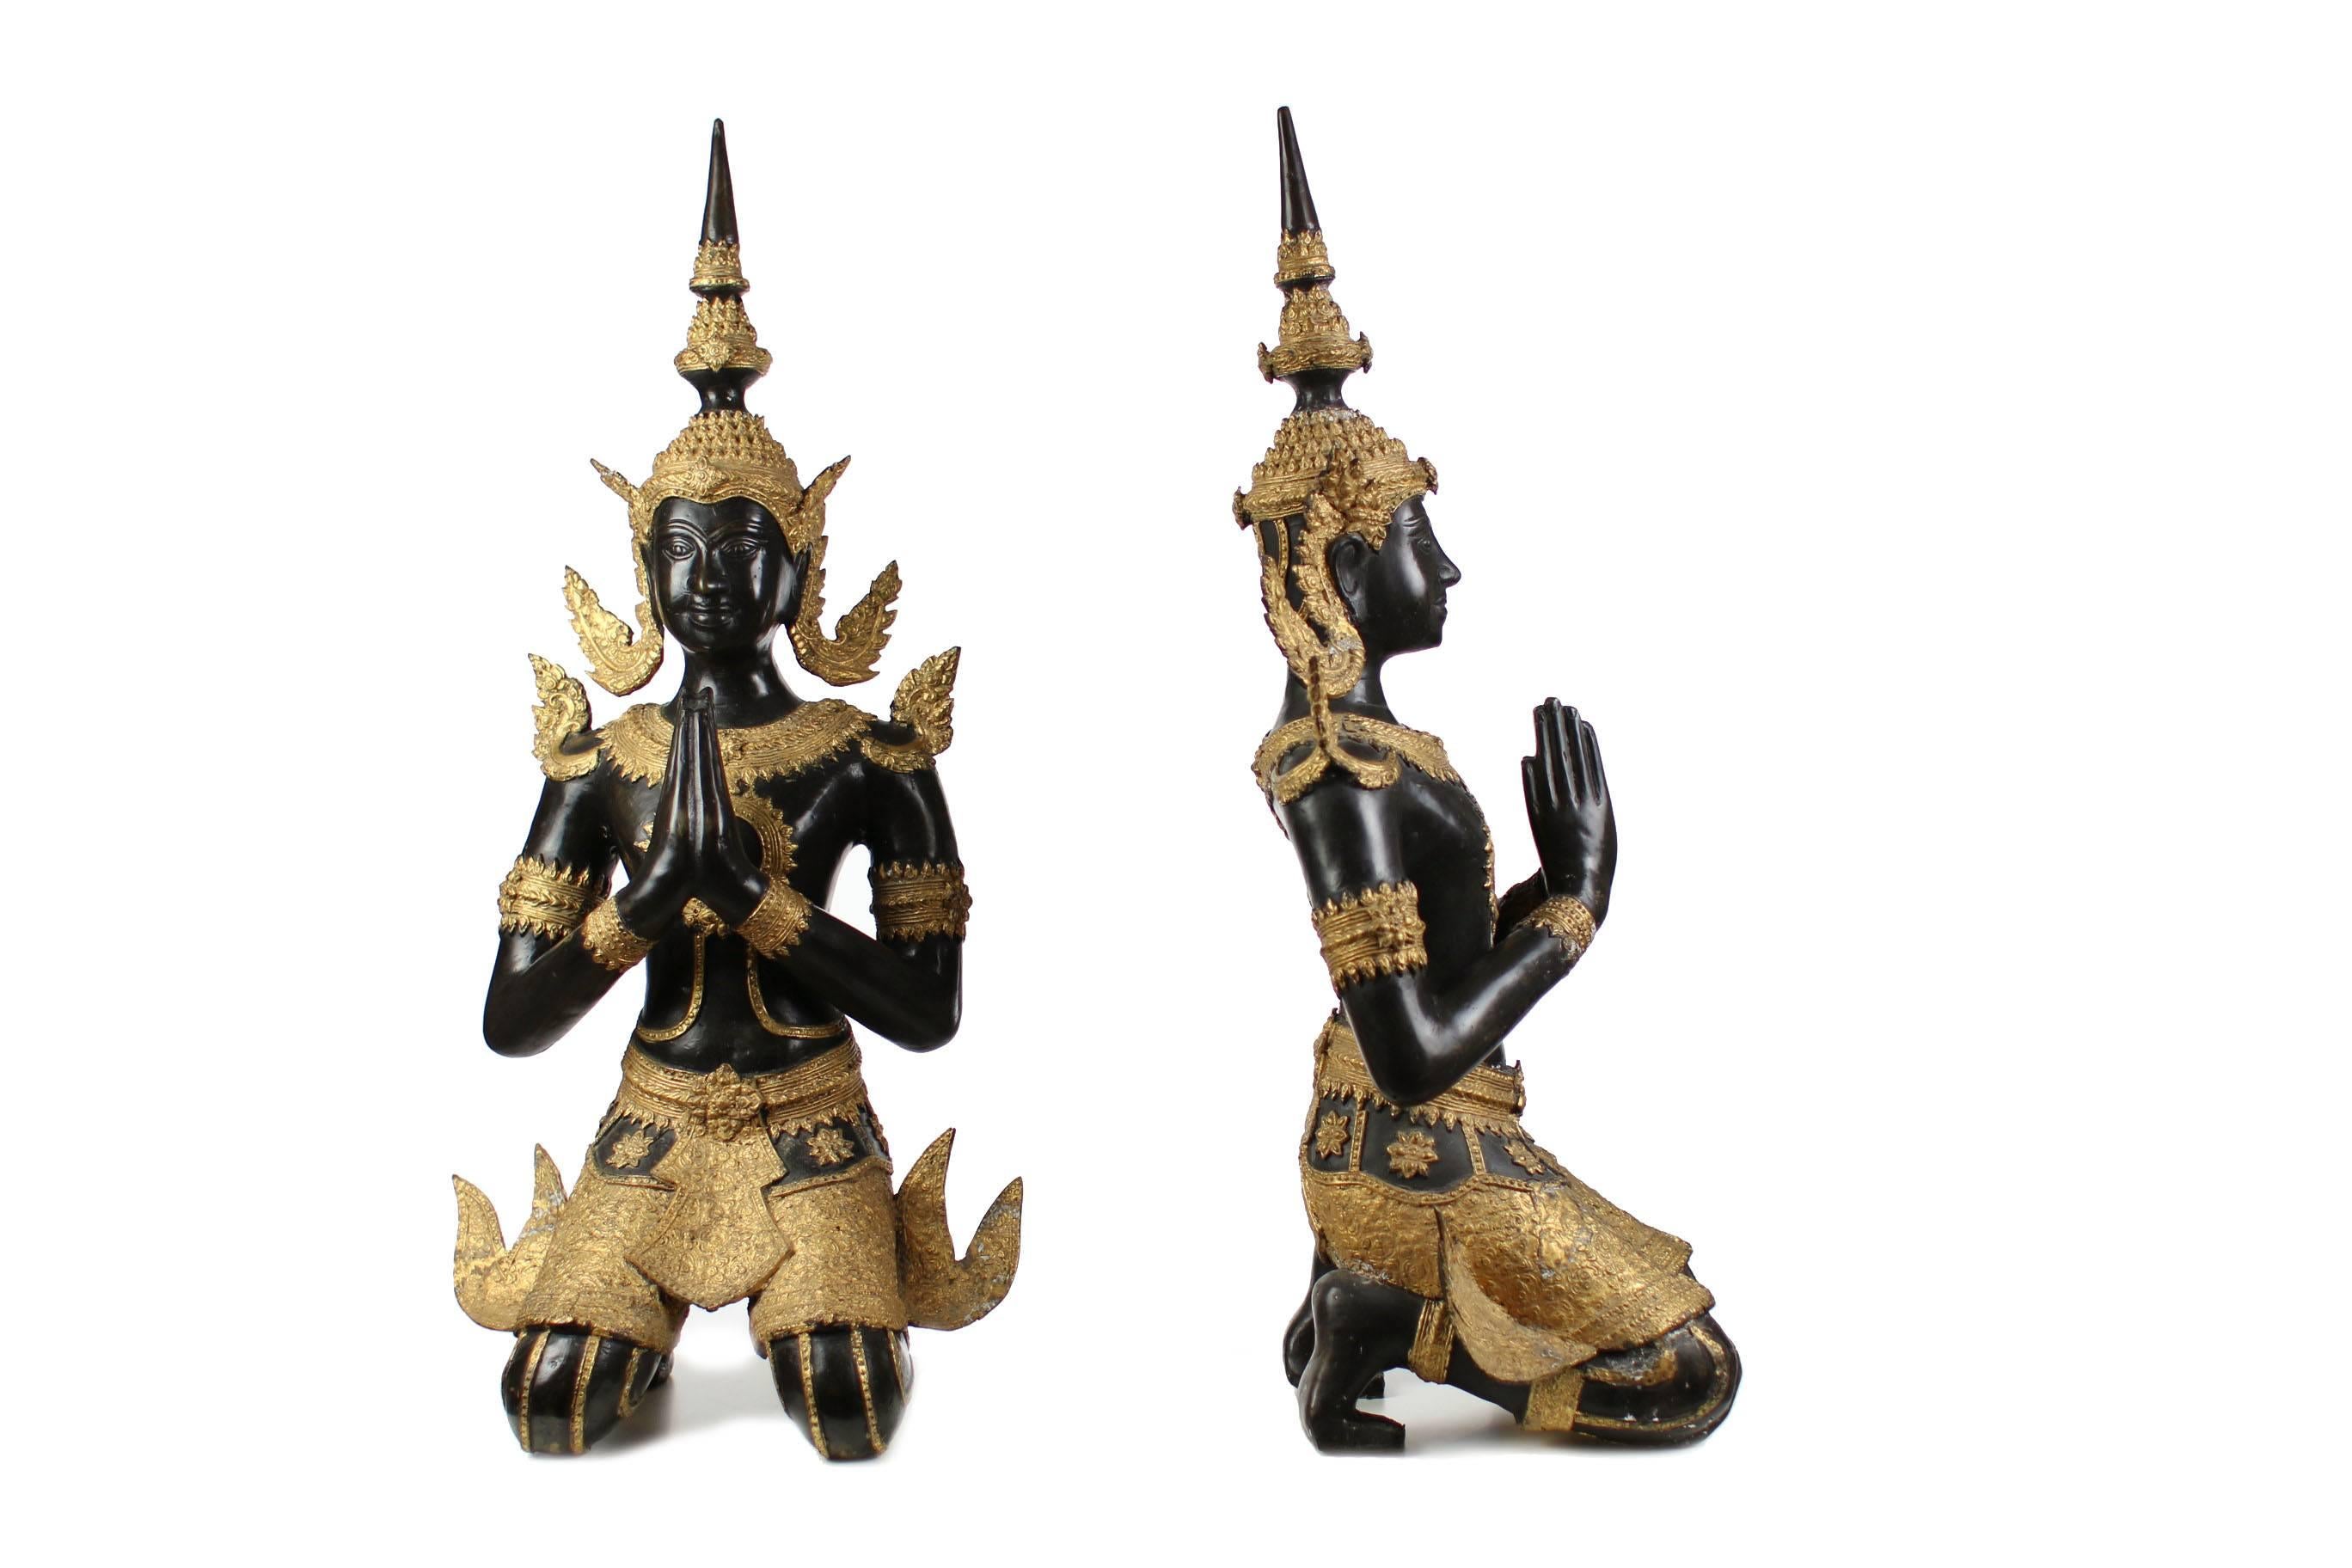 Temple guards, Thailand,
circa end of 19 century.
Bronze,
Partly darkly patinated.
Partly golden-calm.
Height: 80 cm, width 36 cm, depth 26 cm.

I dispatch by air in safe wood boxes only. So no need to worry about the shipment. Delivery can